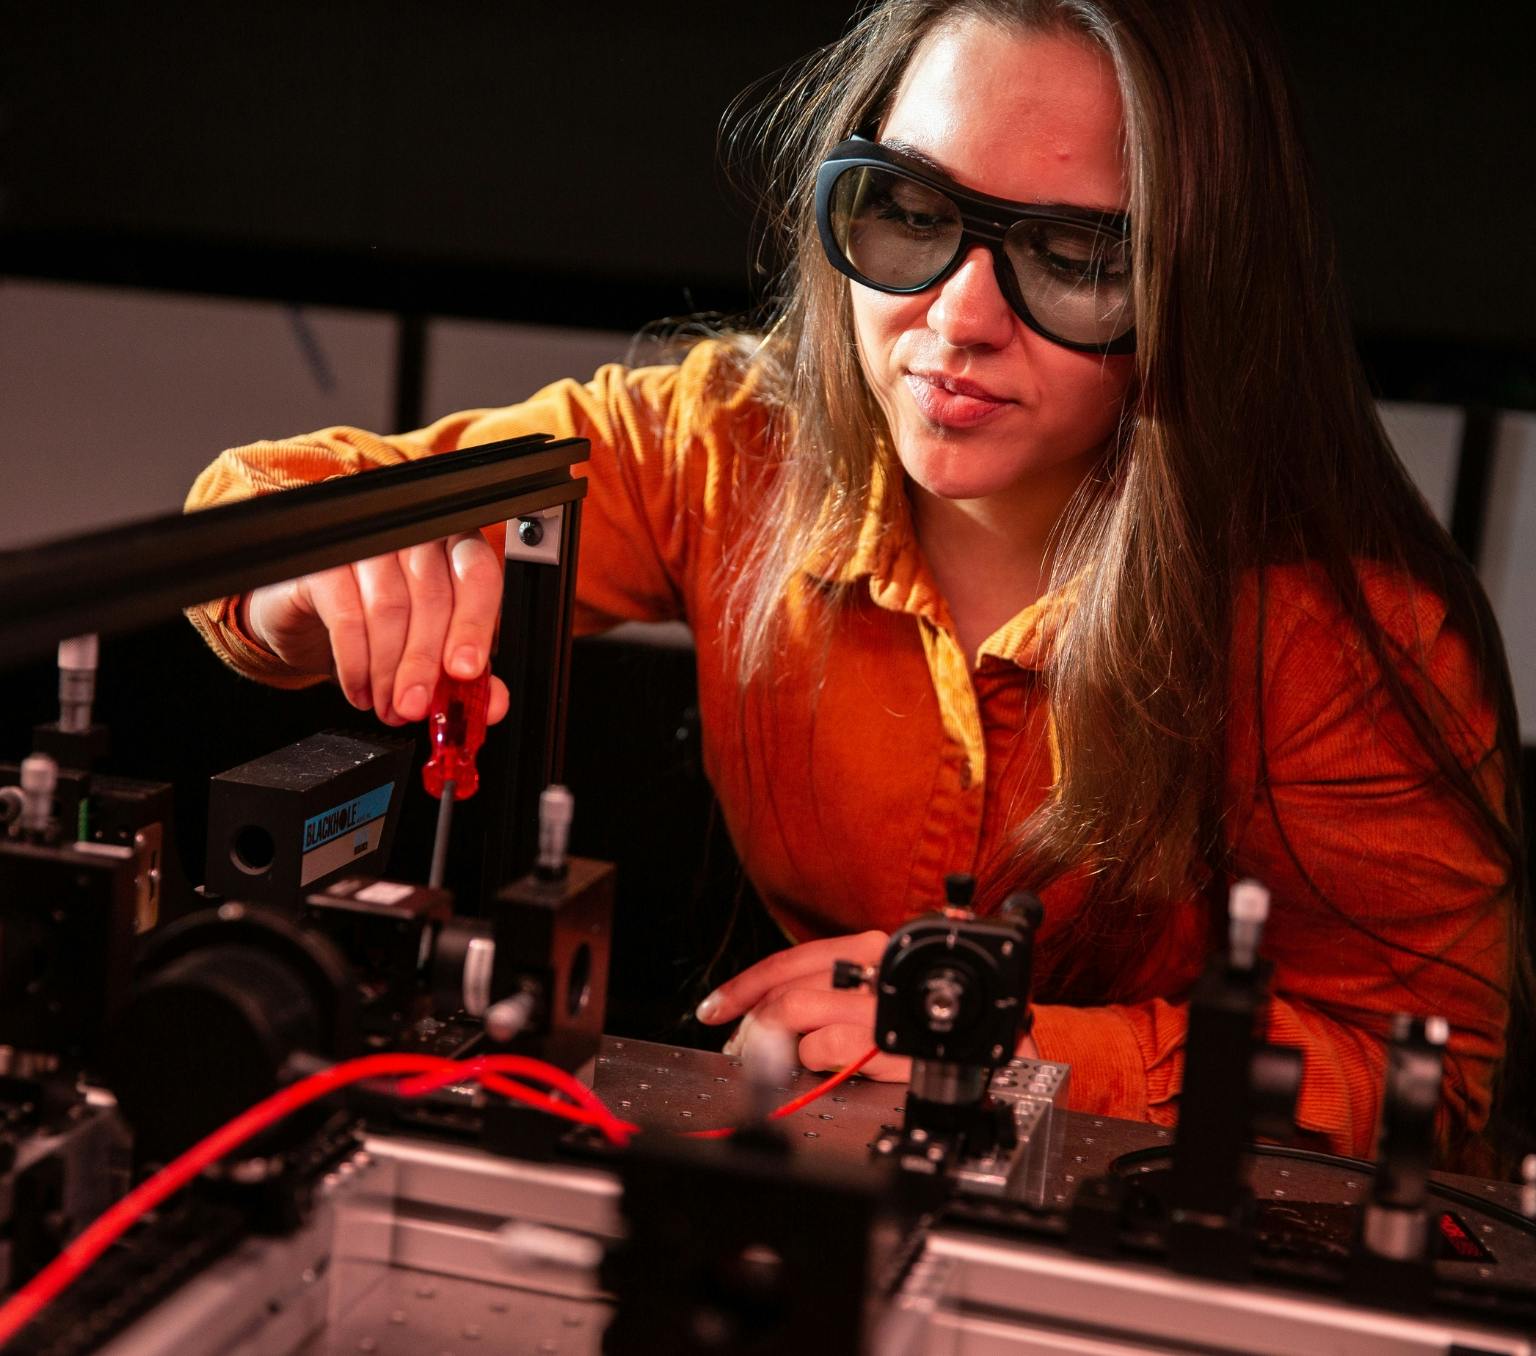 Anastasiia Zalogina working with equipment in the physics lab. She is wearing black goggles.